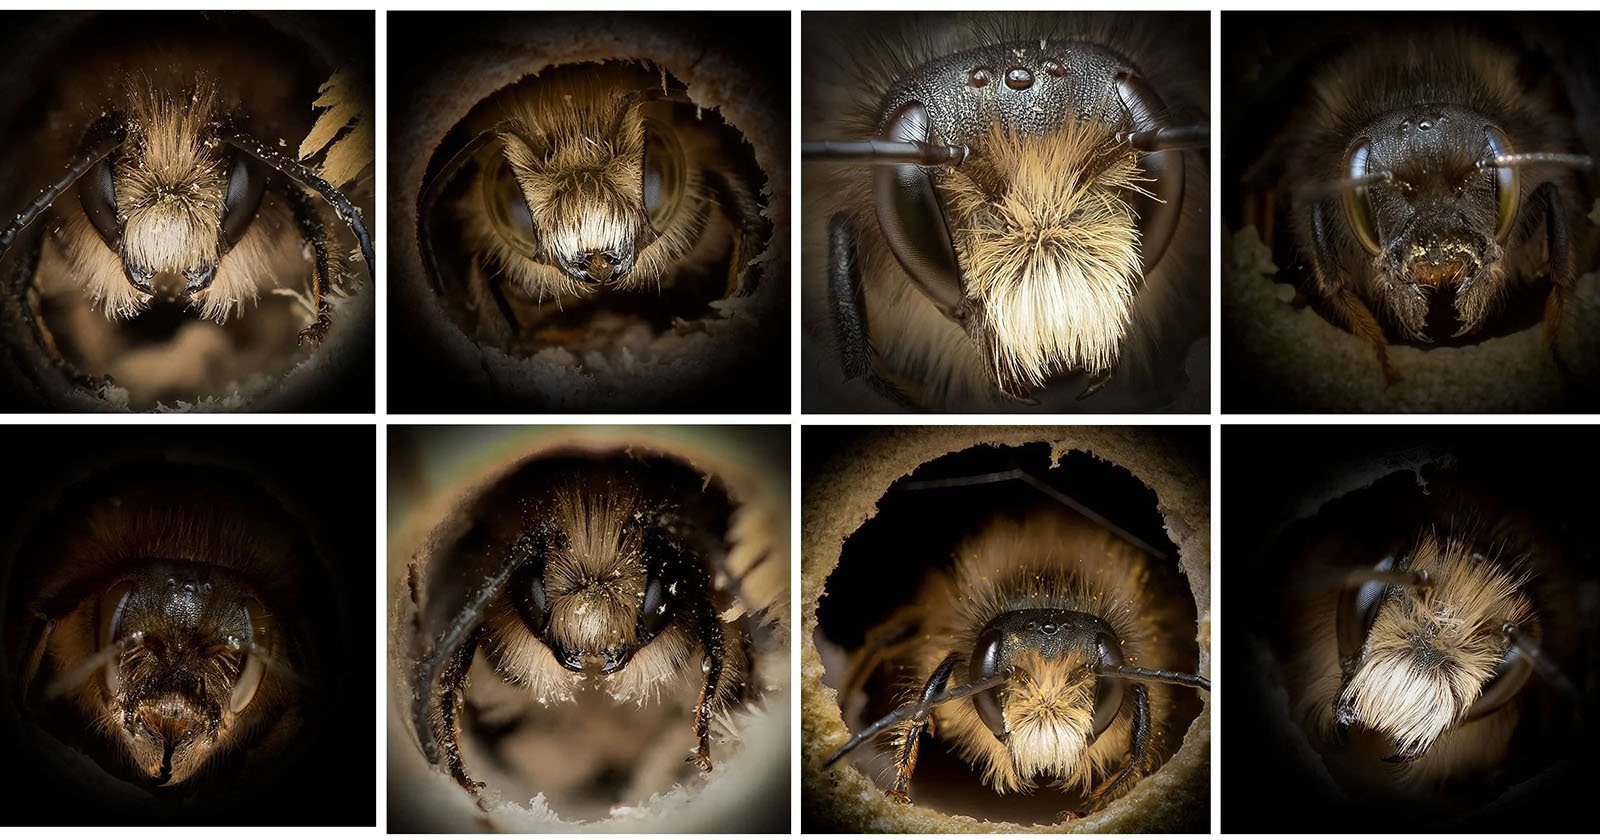 Close-Up Portraits of Bees Reveal How Different They Actually Look